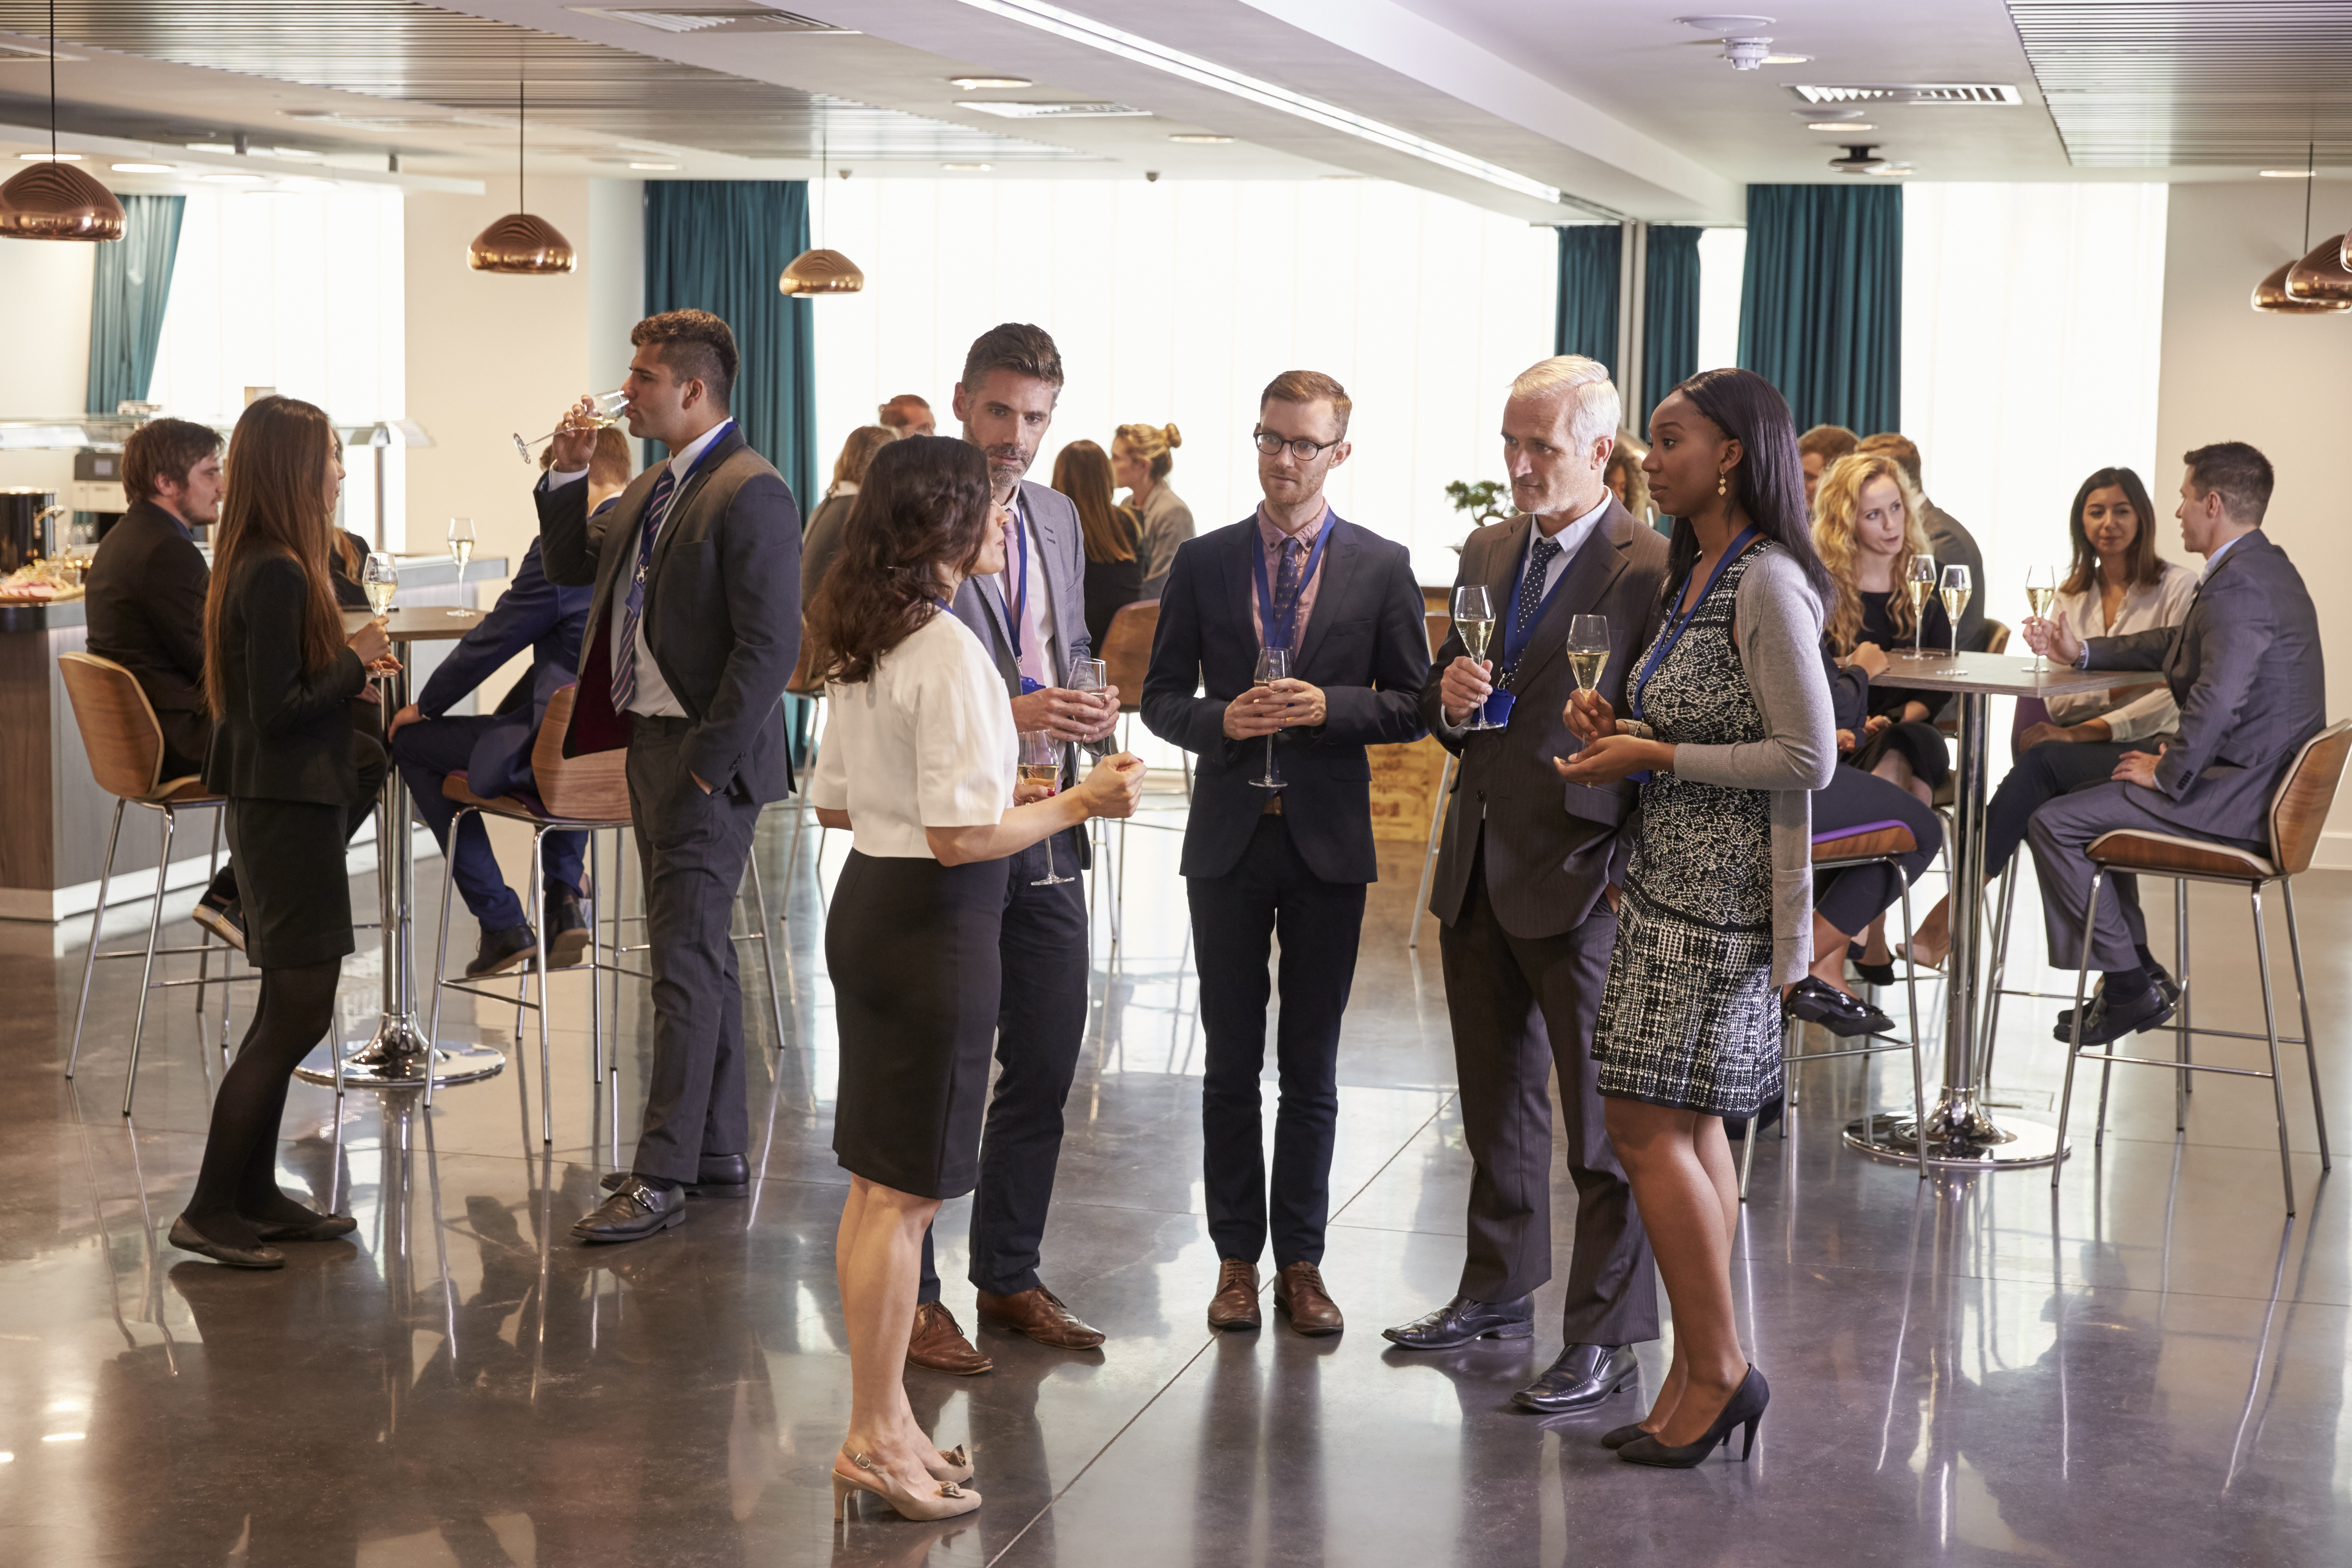 People at a networking event